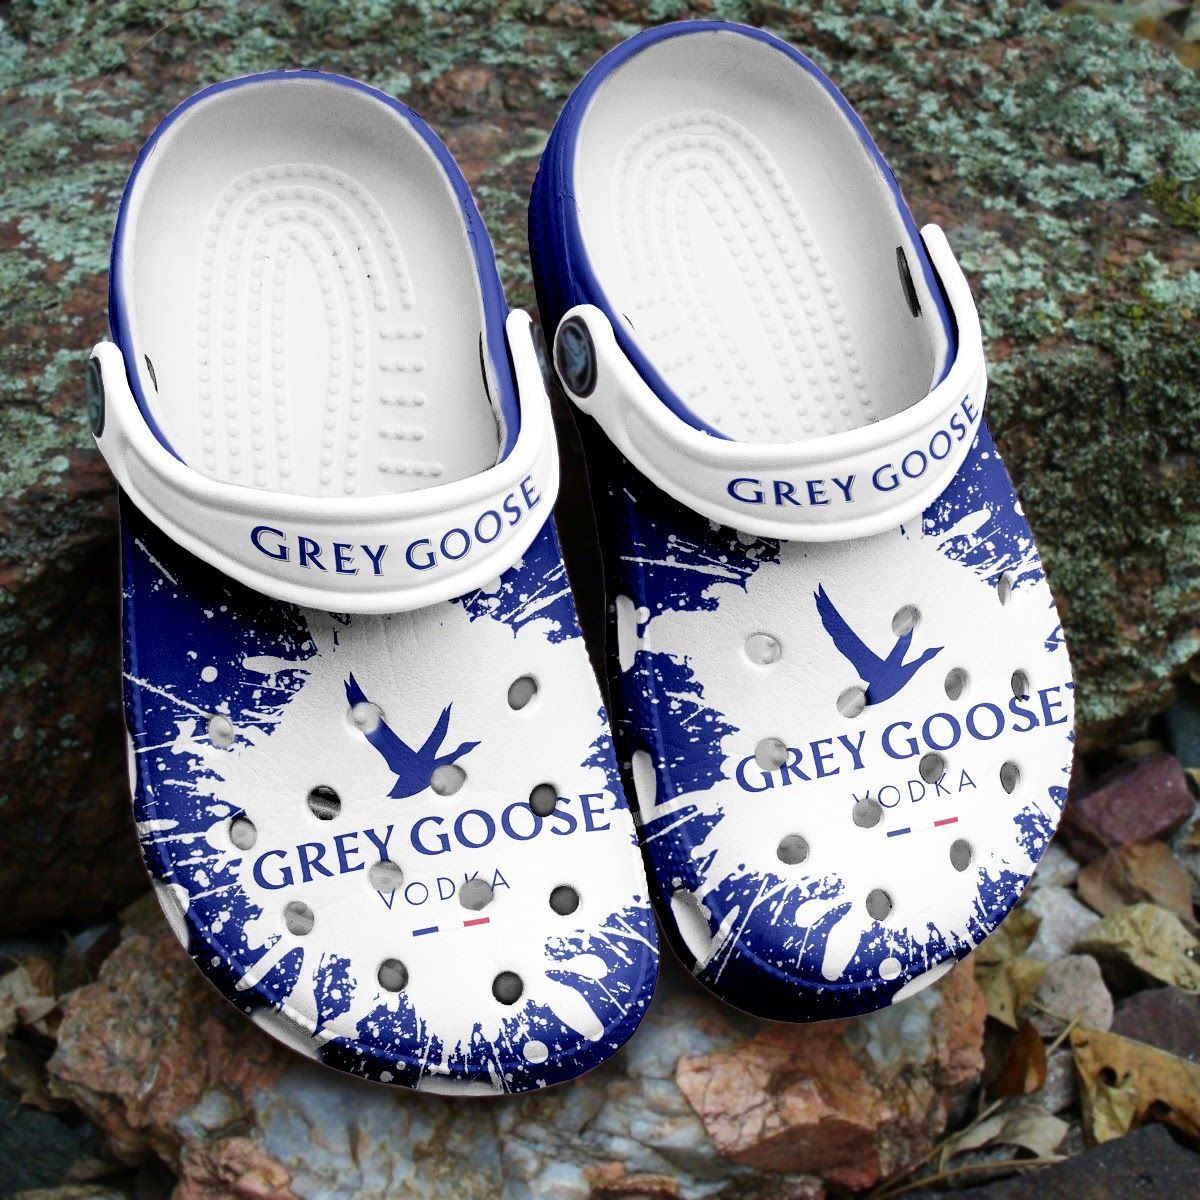 If you'd like to purchase a pair of Crocband Clogs, be sure to check out the official website. 131